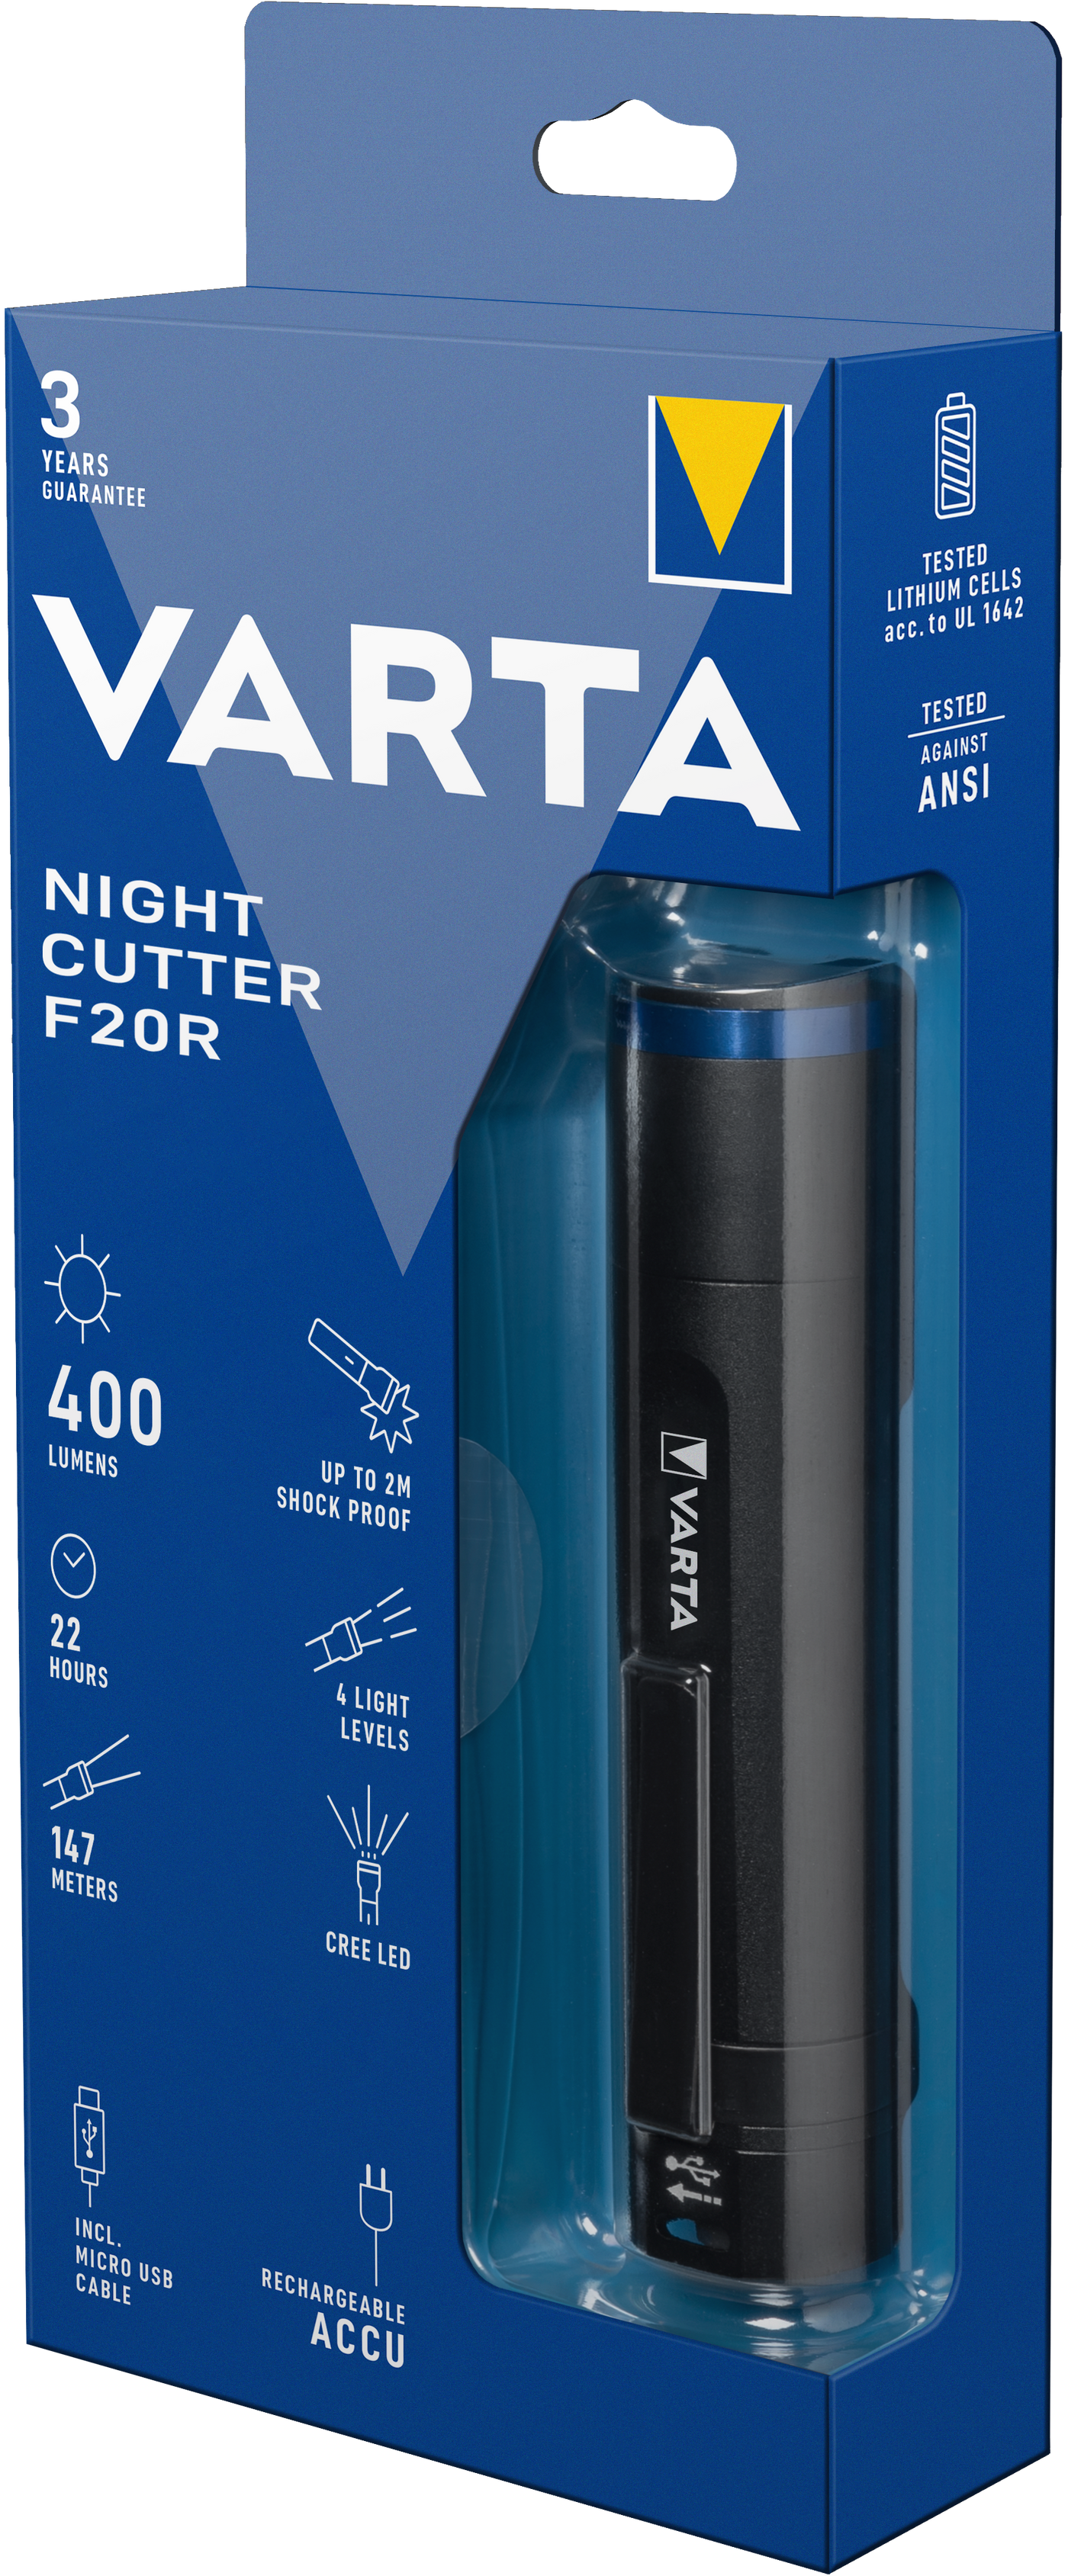 Varta 18900 Night Cutter F20R Rechargeable